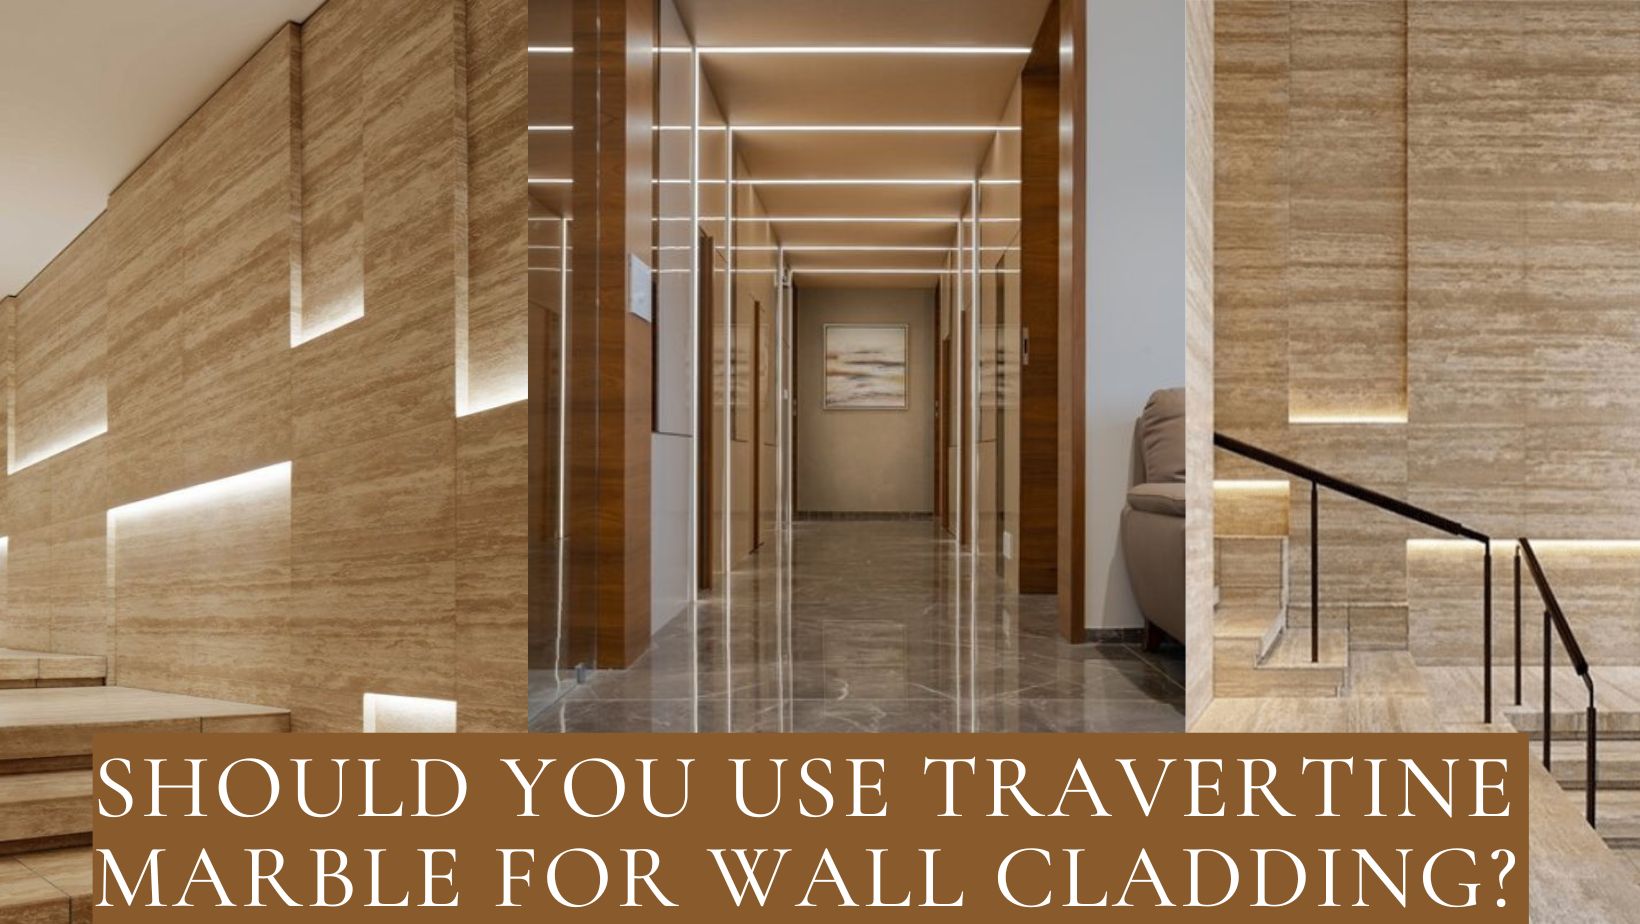 Should You Use Travertine Marble For Wall Cladding?